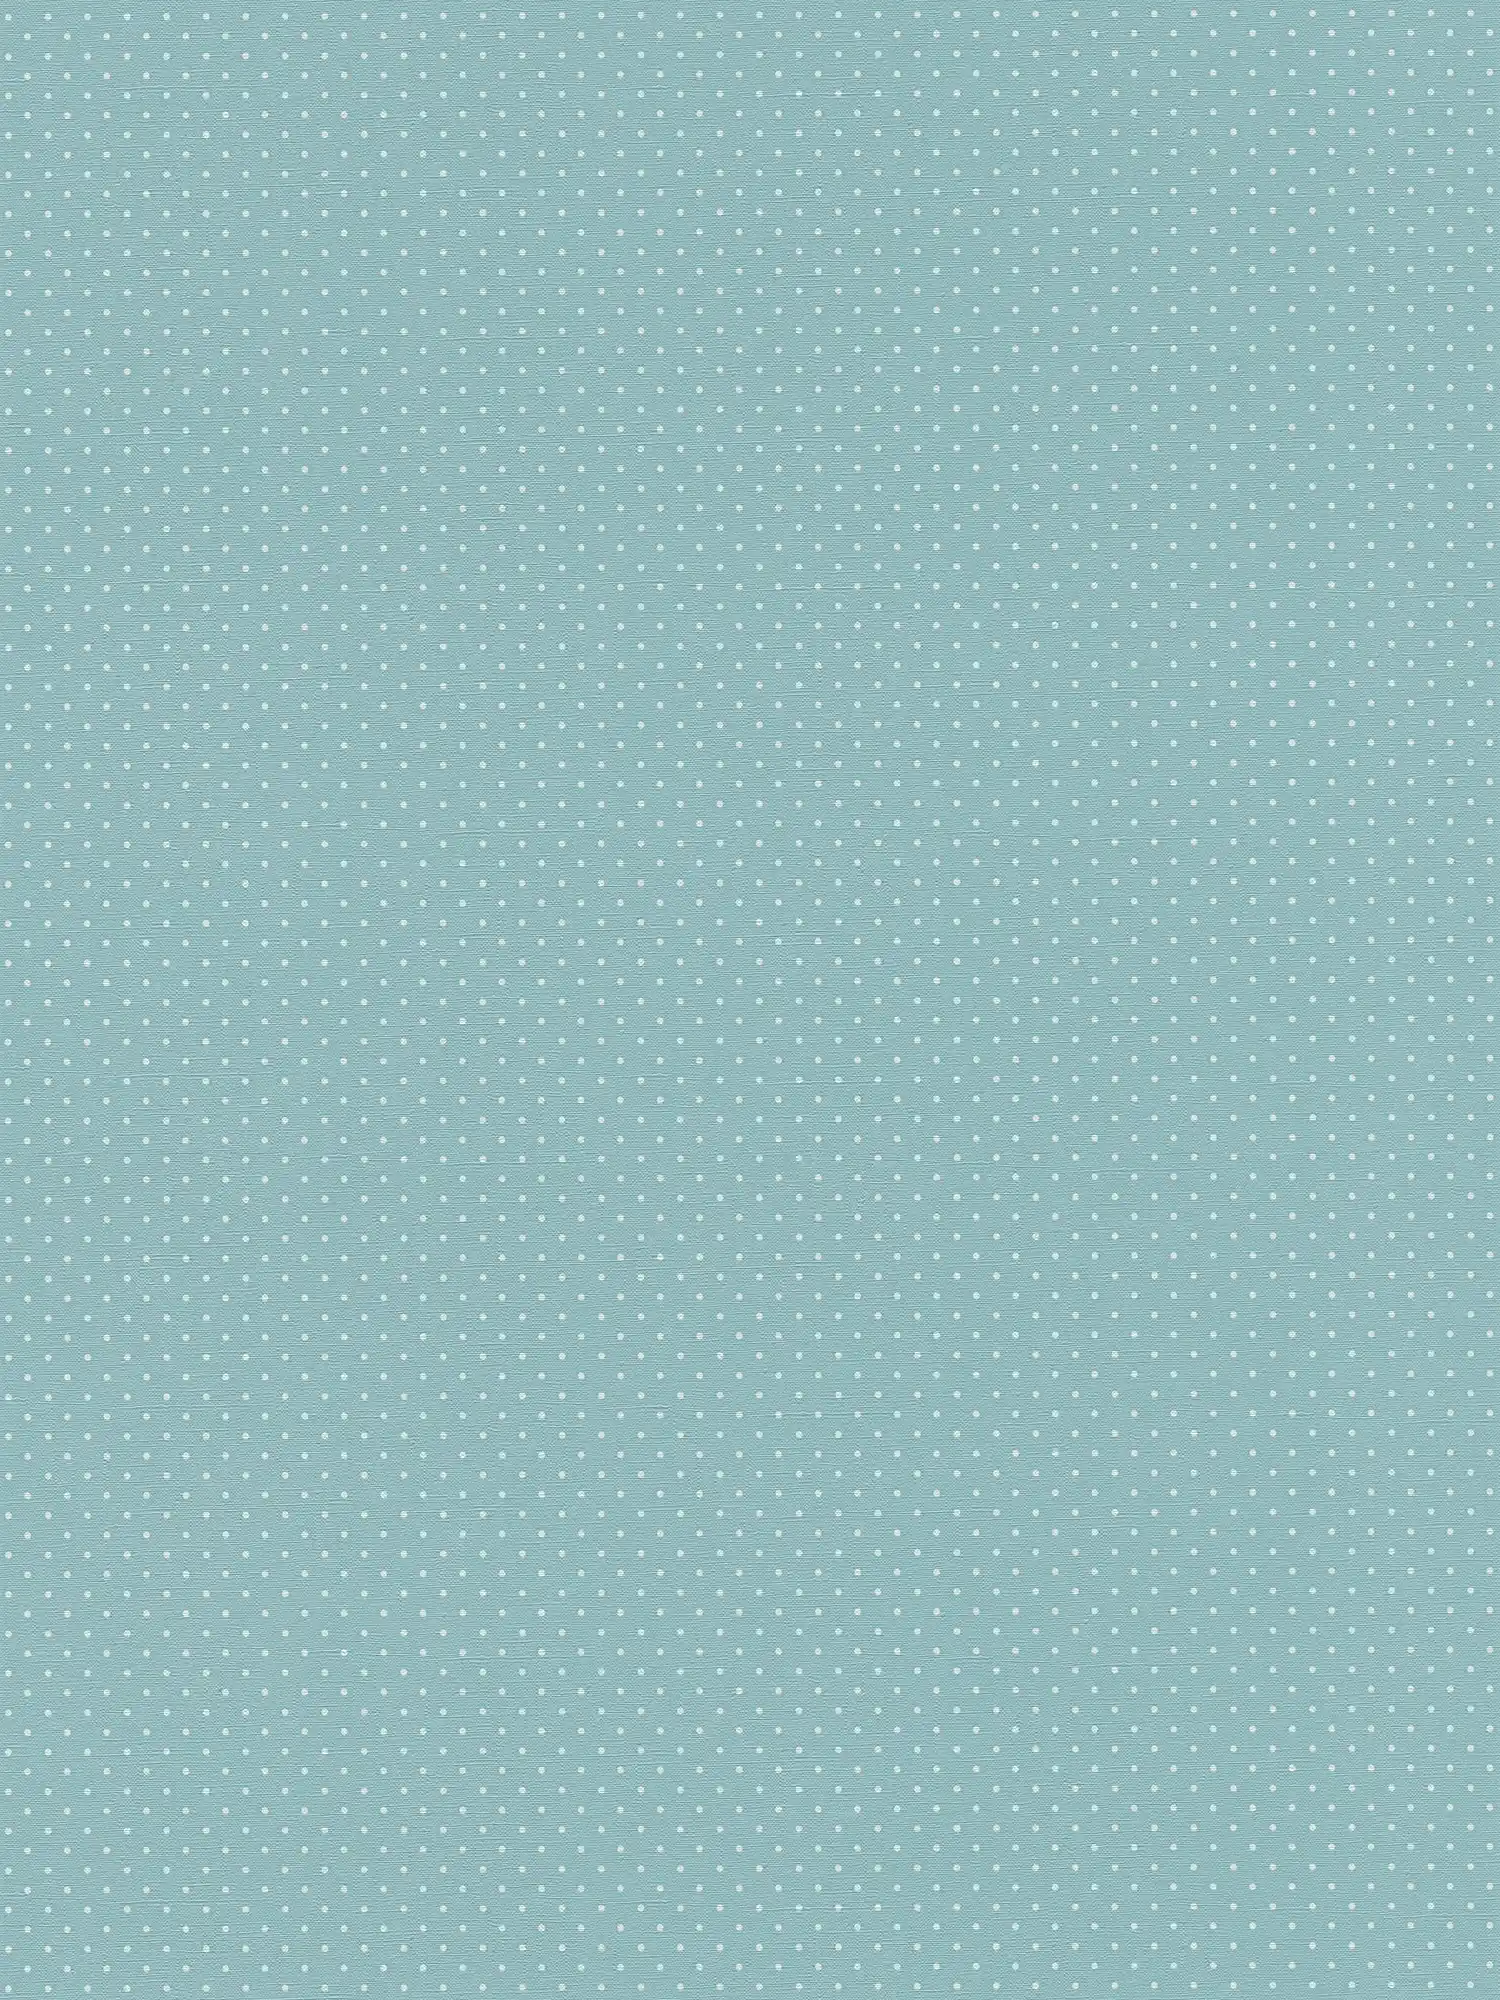 Non-woven wallpaper with small dot pattern - blue, white
